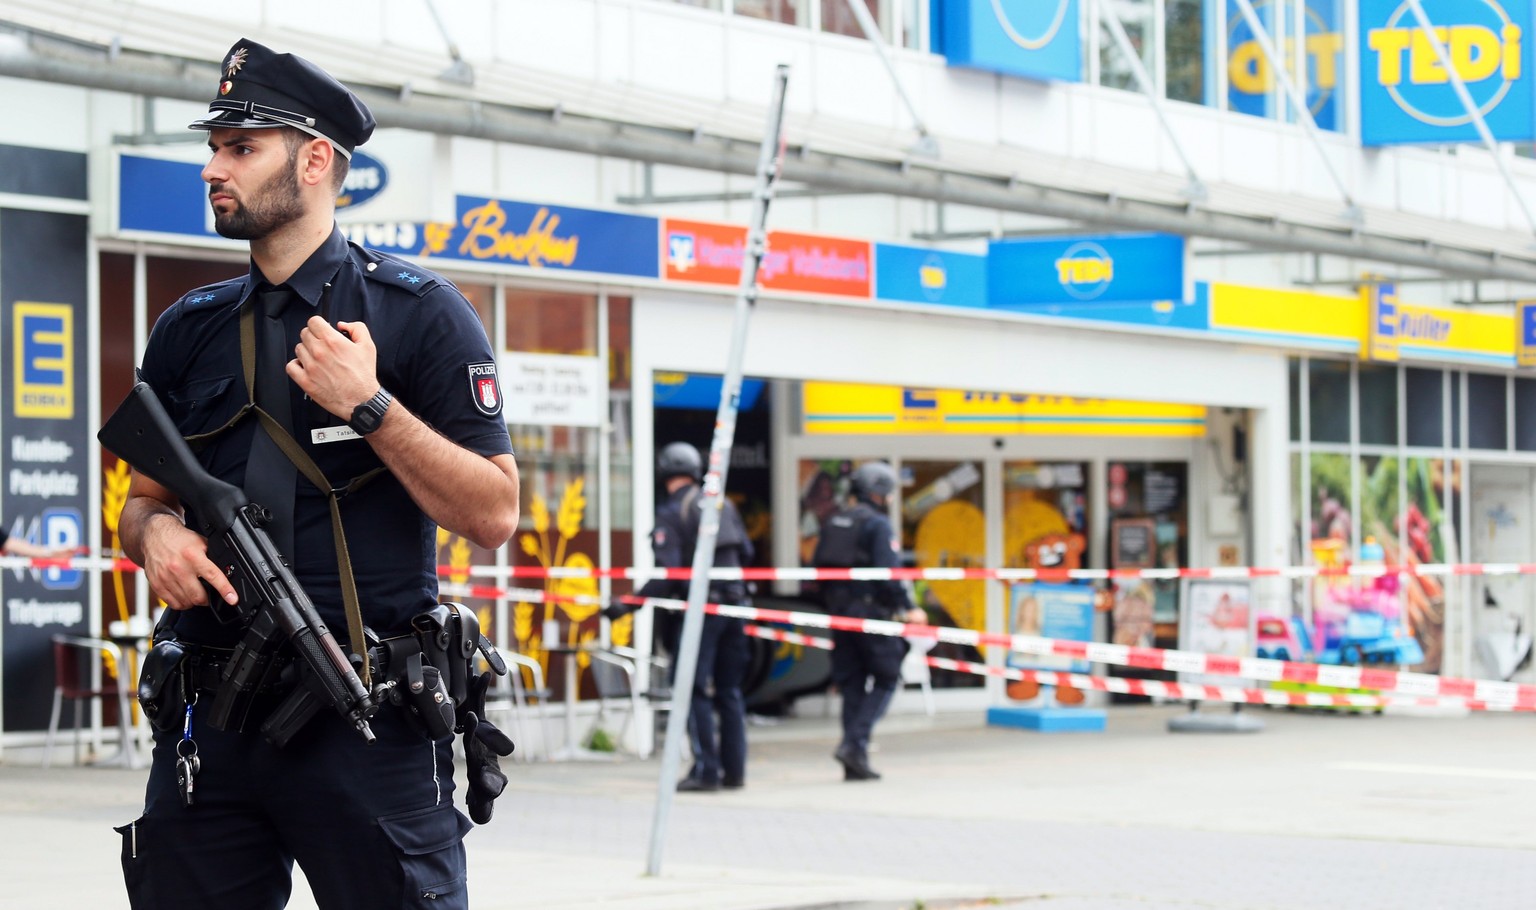 epa06114870 Police officers stands in front of a supermarket in Hamburg, Germany, 27 July 2017. According to police reports a man attacked several people in a supermarket in Hamburg. One victim is rep ...